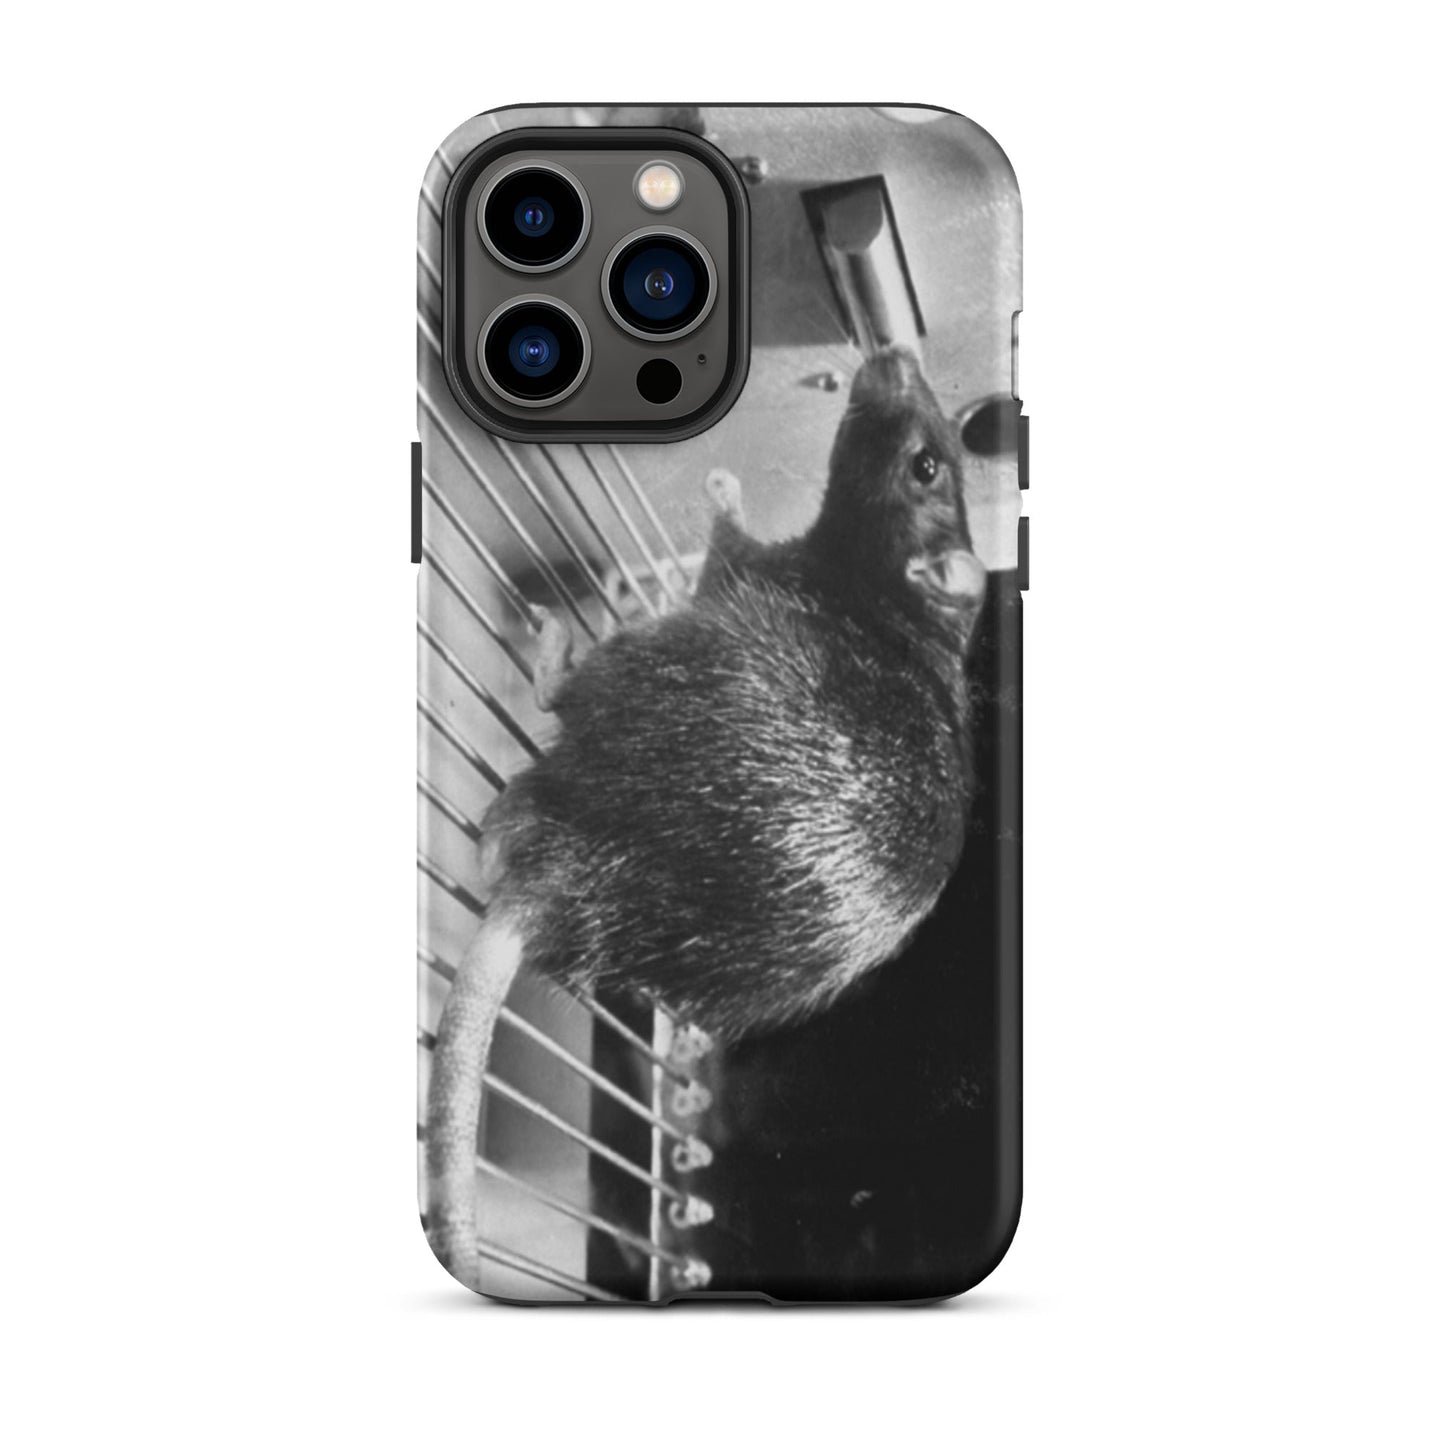 Skinner Box Rat - Tough iPhone case - Souled Out World